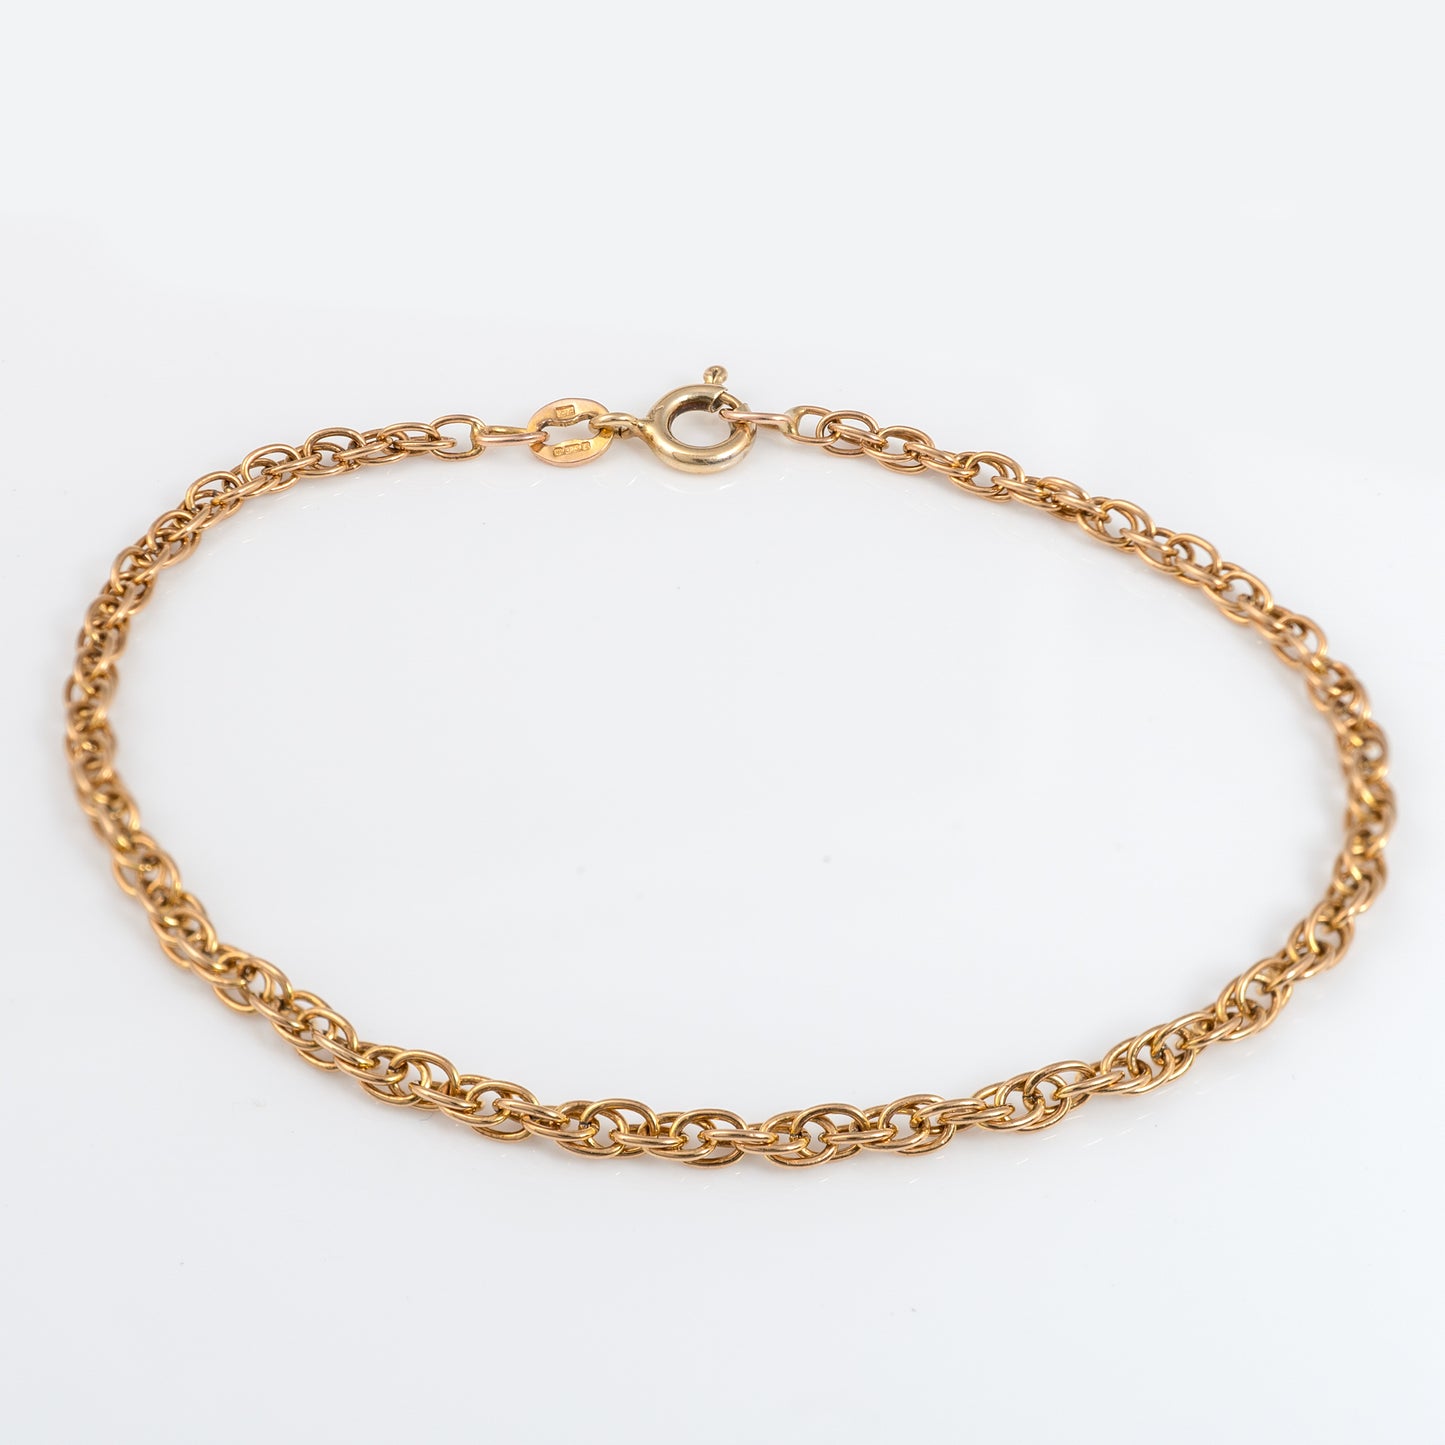 Real Gold Bracelet for Women with Fancy Rope Link